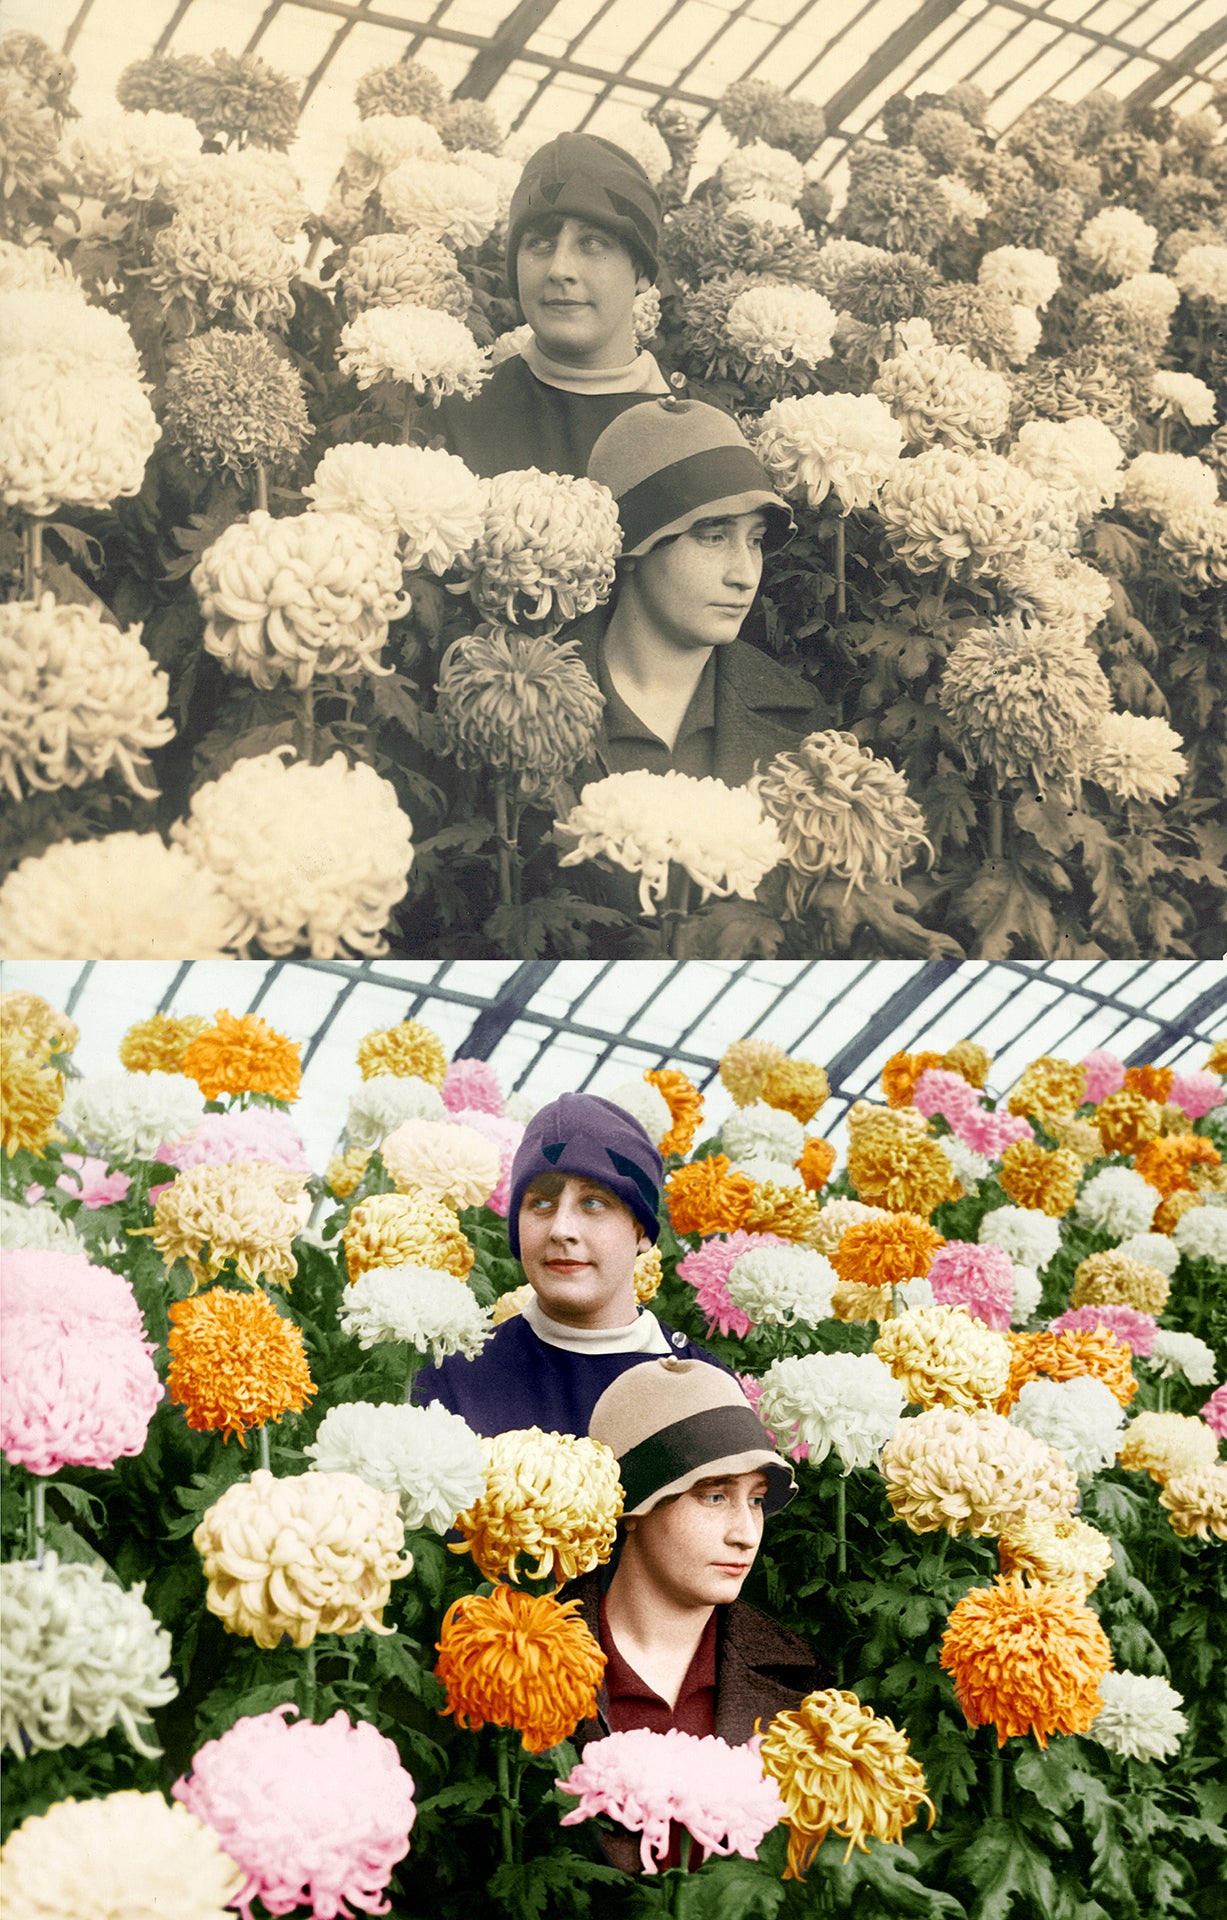 Women in Mums, estimated 1920s, from the archives of Phipps Conservatory & Botanical Gardens in Pittsburgh, Pennsylvania